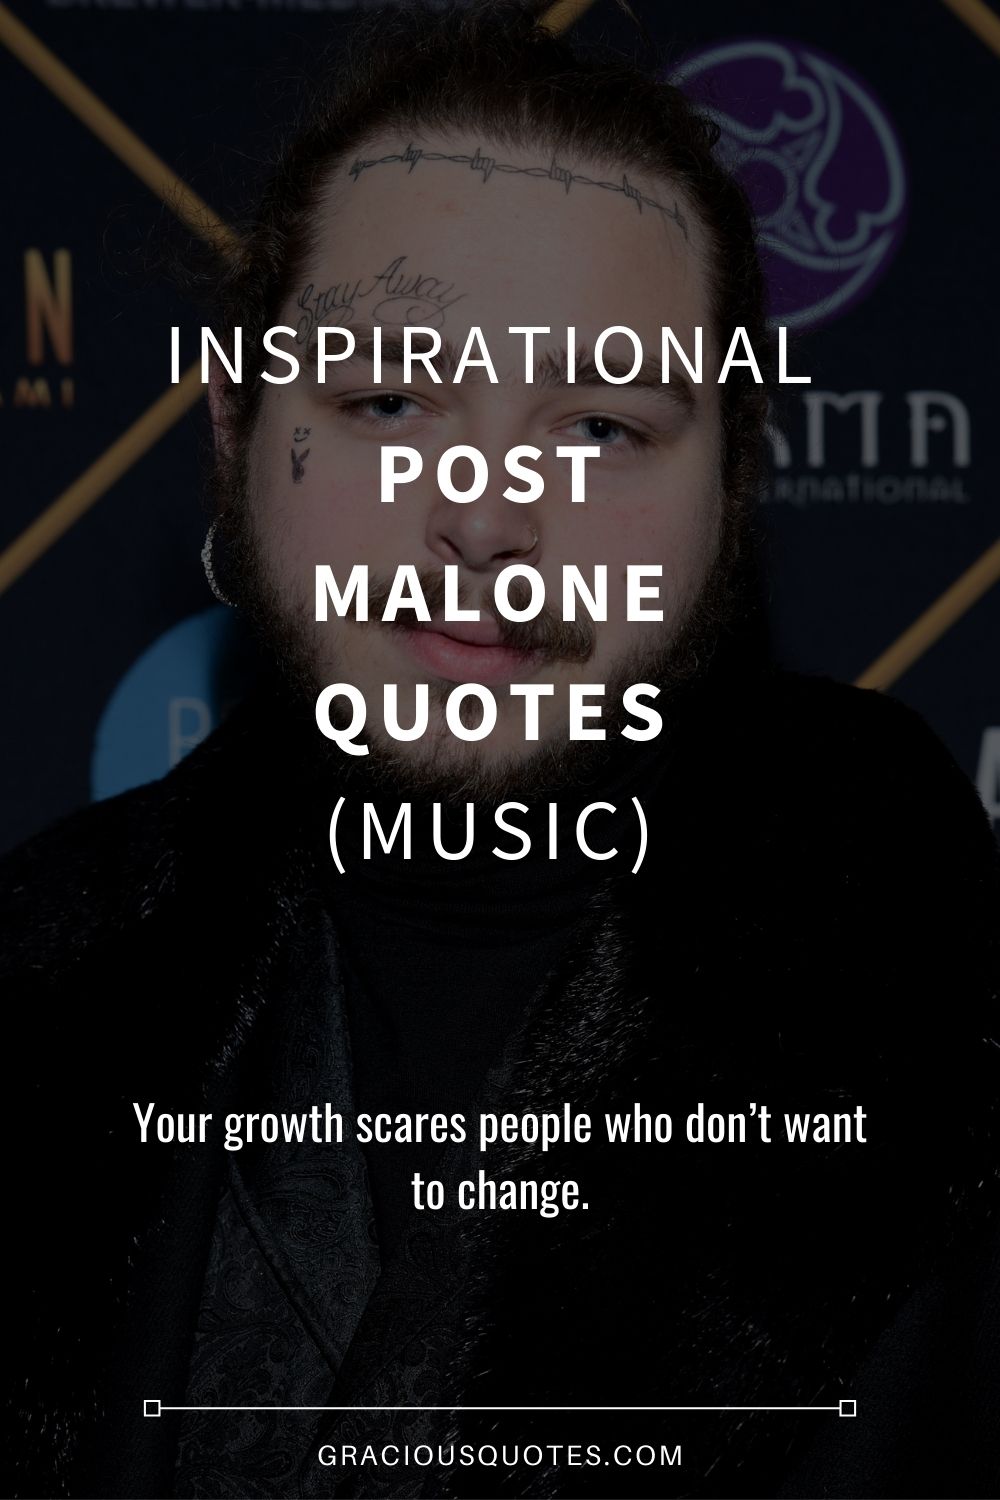 41 Inspirational Post Malone Quotes (MUSIC)